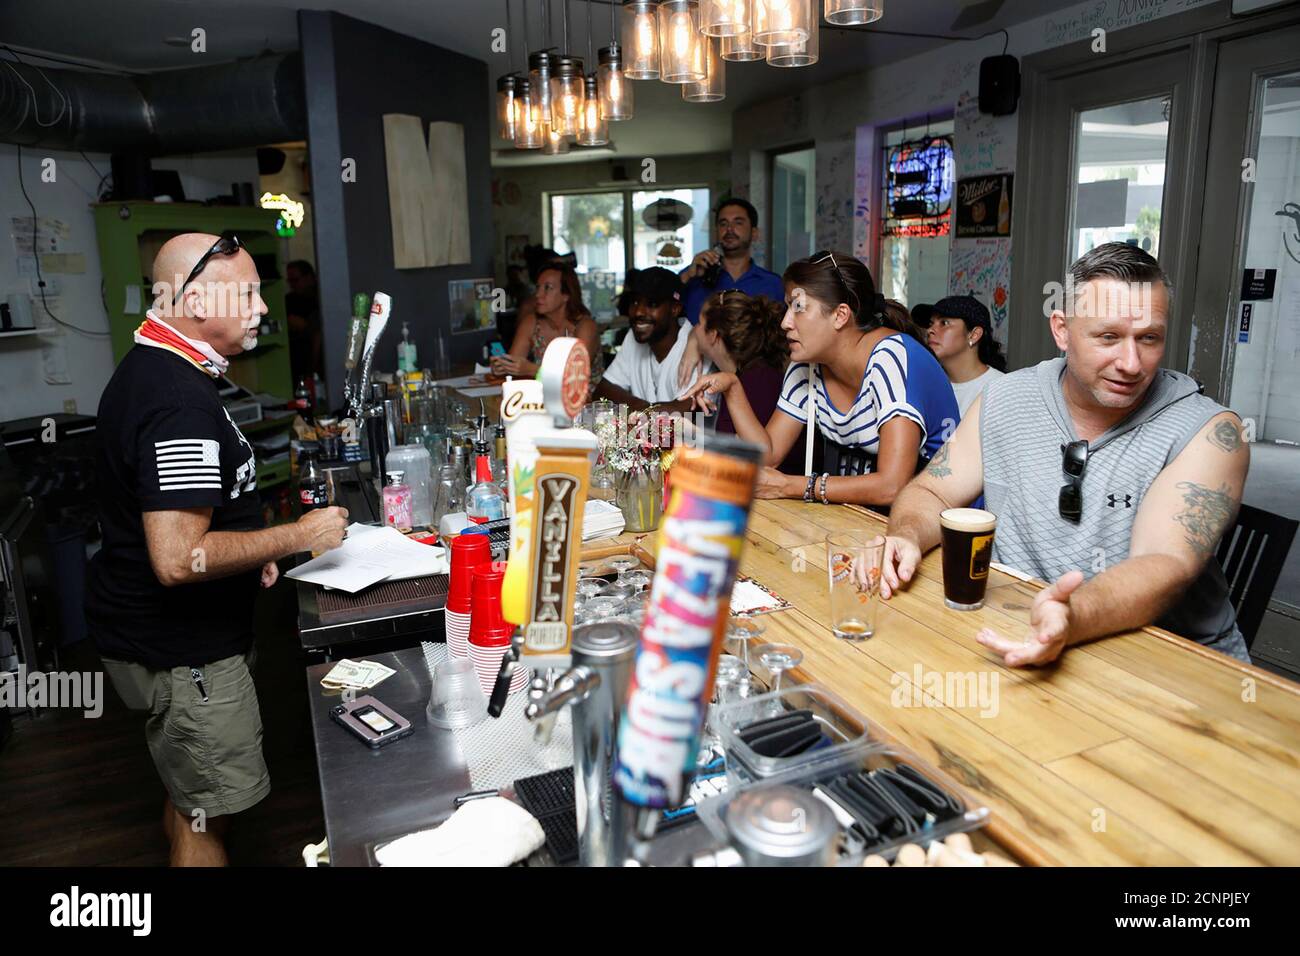 Bar patrons attend the reopen Florida 'maskless' rally and dinner held at 33 & Melt restaurant to protest mandatory face mask restrictions during the coronavirus disease (COVID-19) pandemic in Windermere, Florida, U.S. July 11, 2020. REUTERS/Octavio Jones Stock Photo